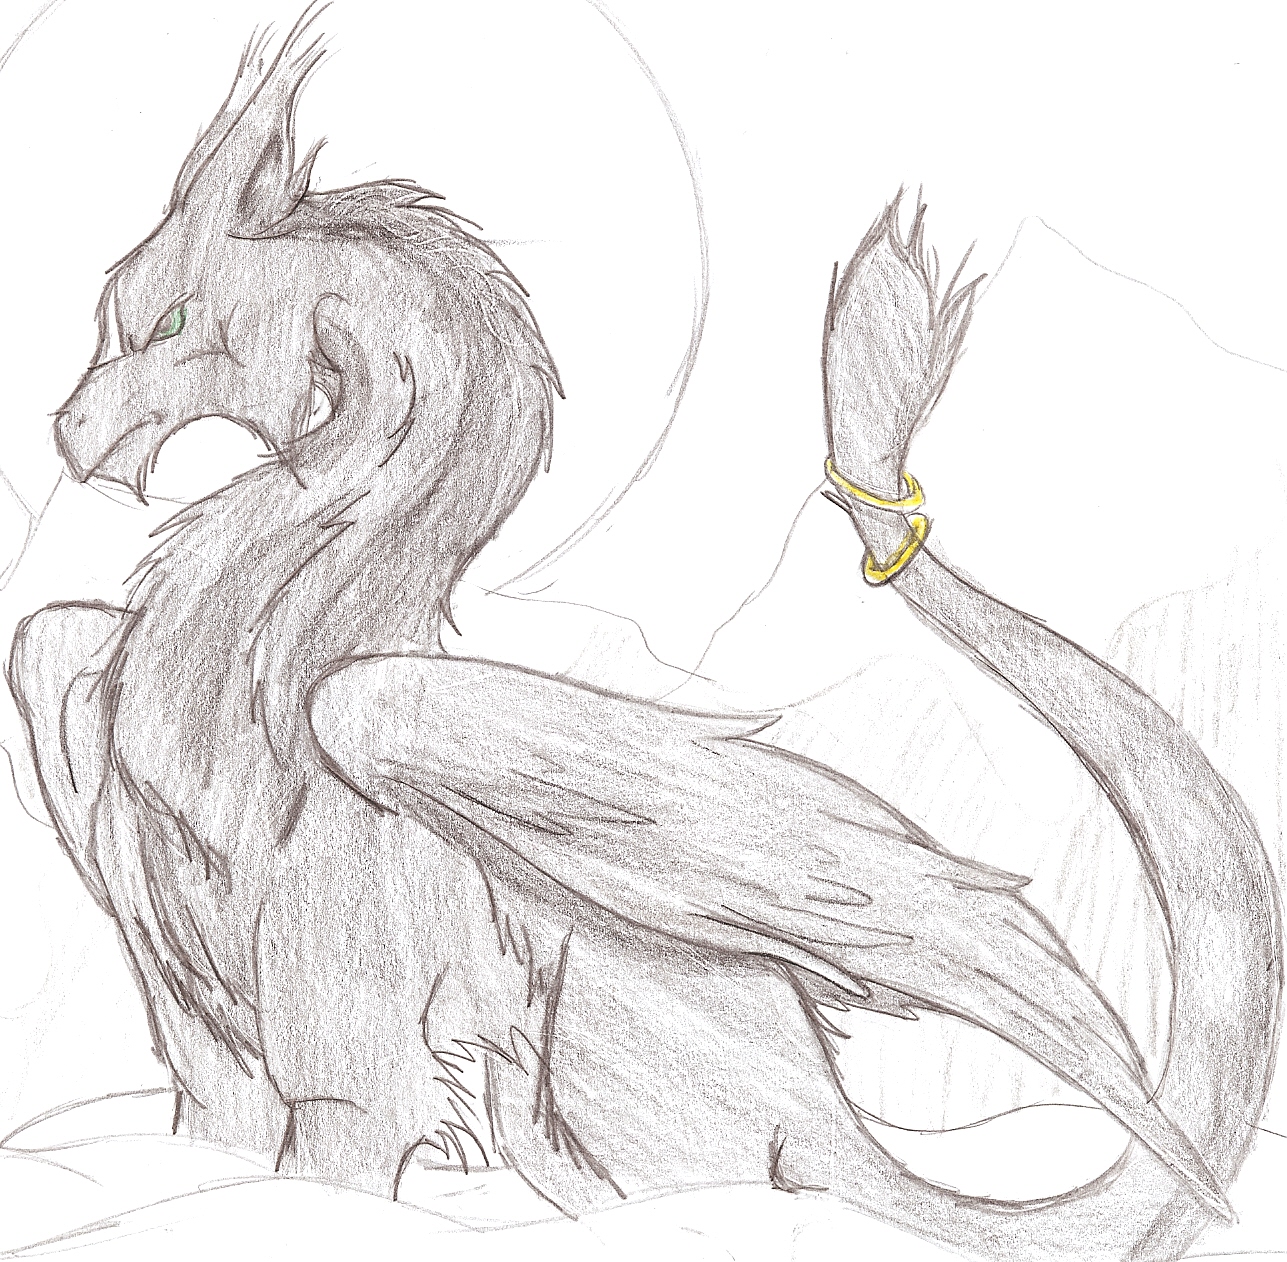 Tis Skye! The Feathered Dragon! by ForeverBlessed